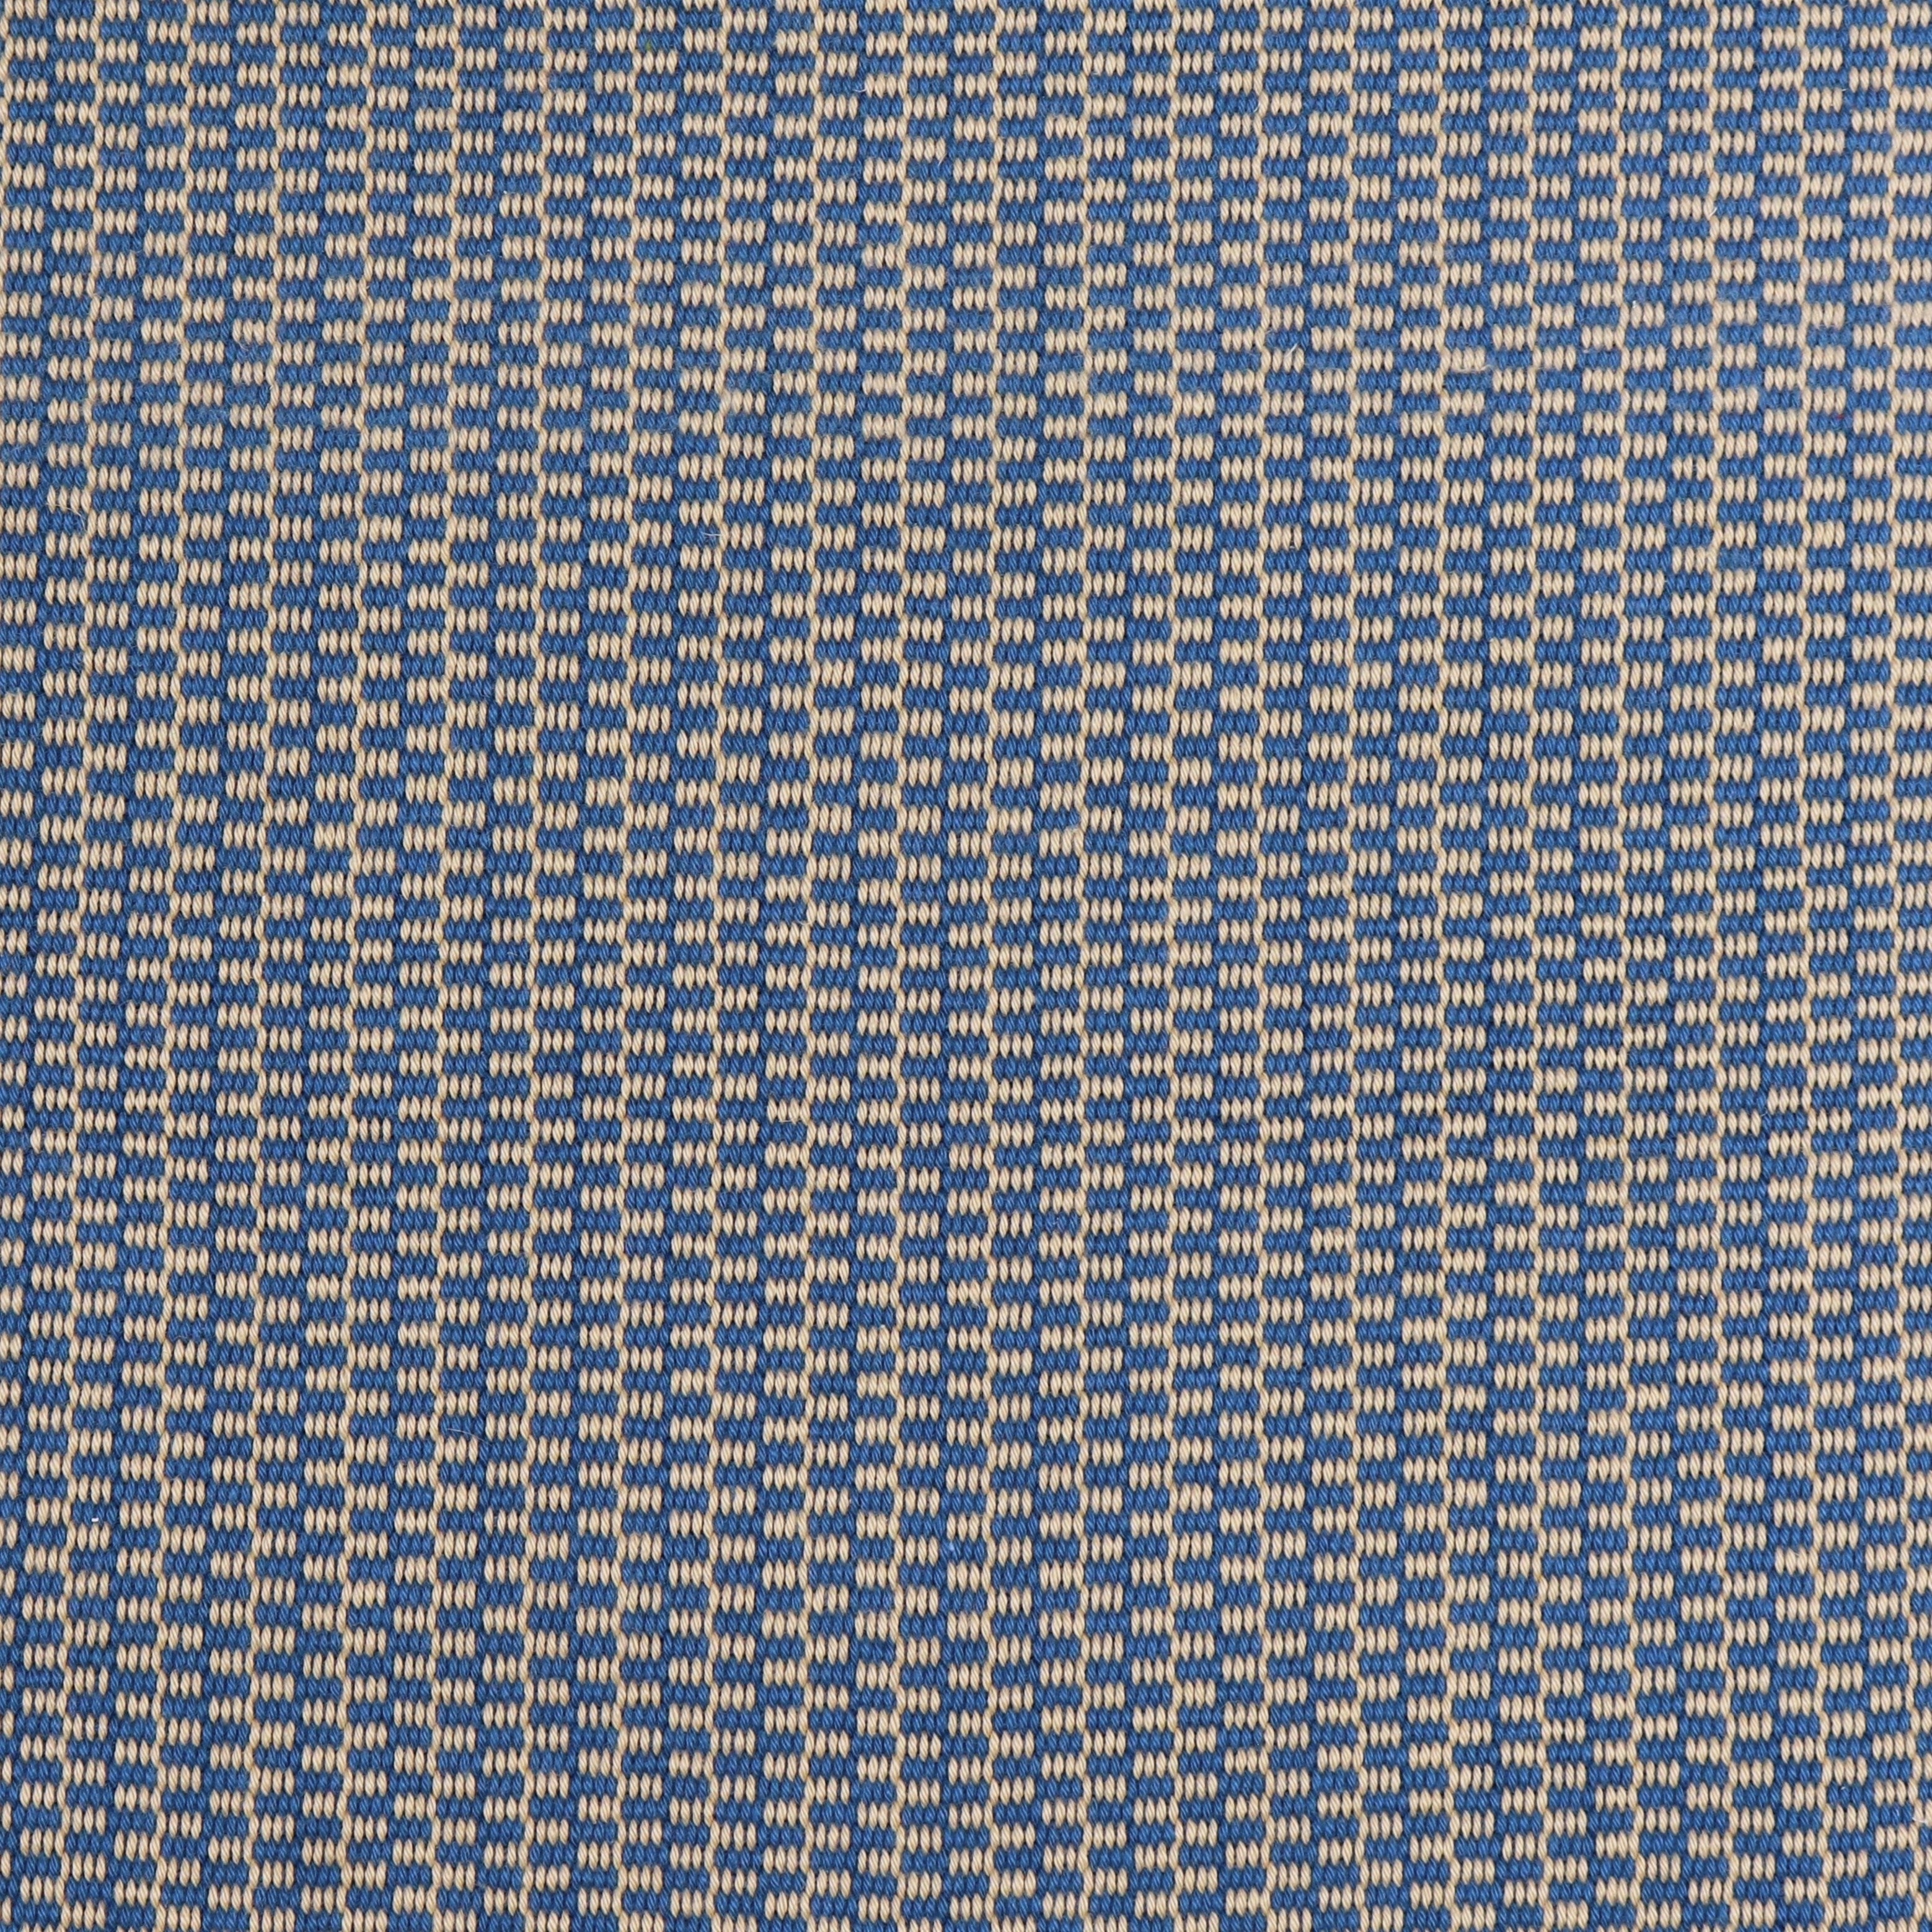 Detail of a hand-woven cotton fabric in a grid pattern in blue and tan.